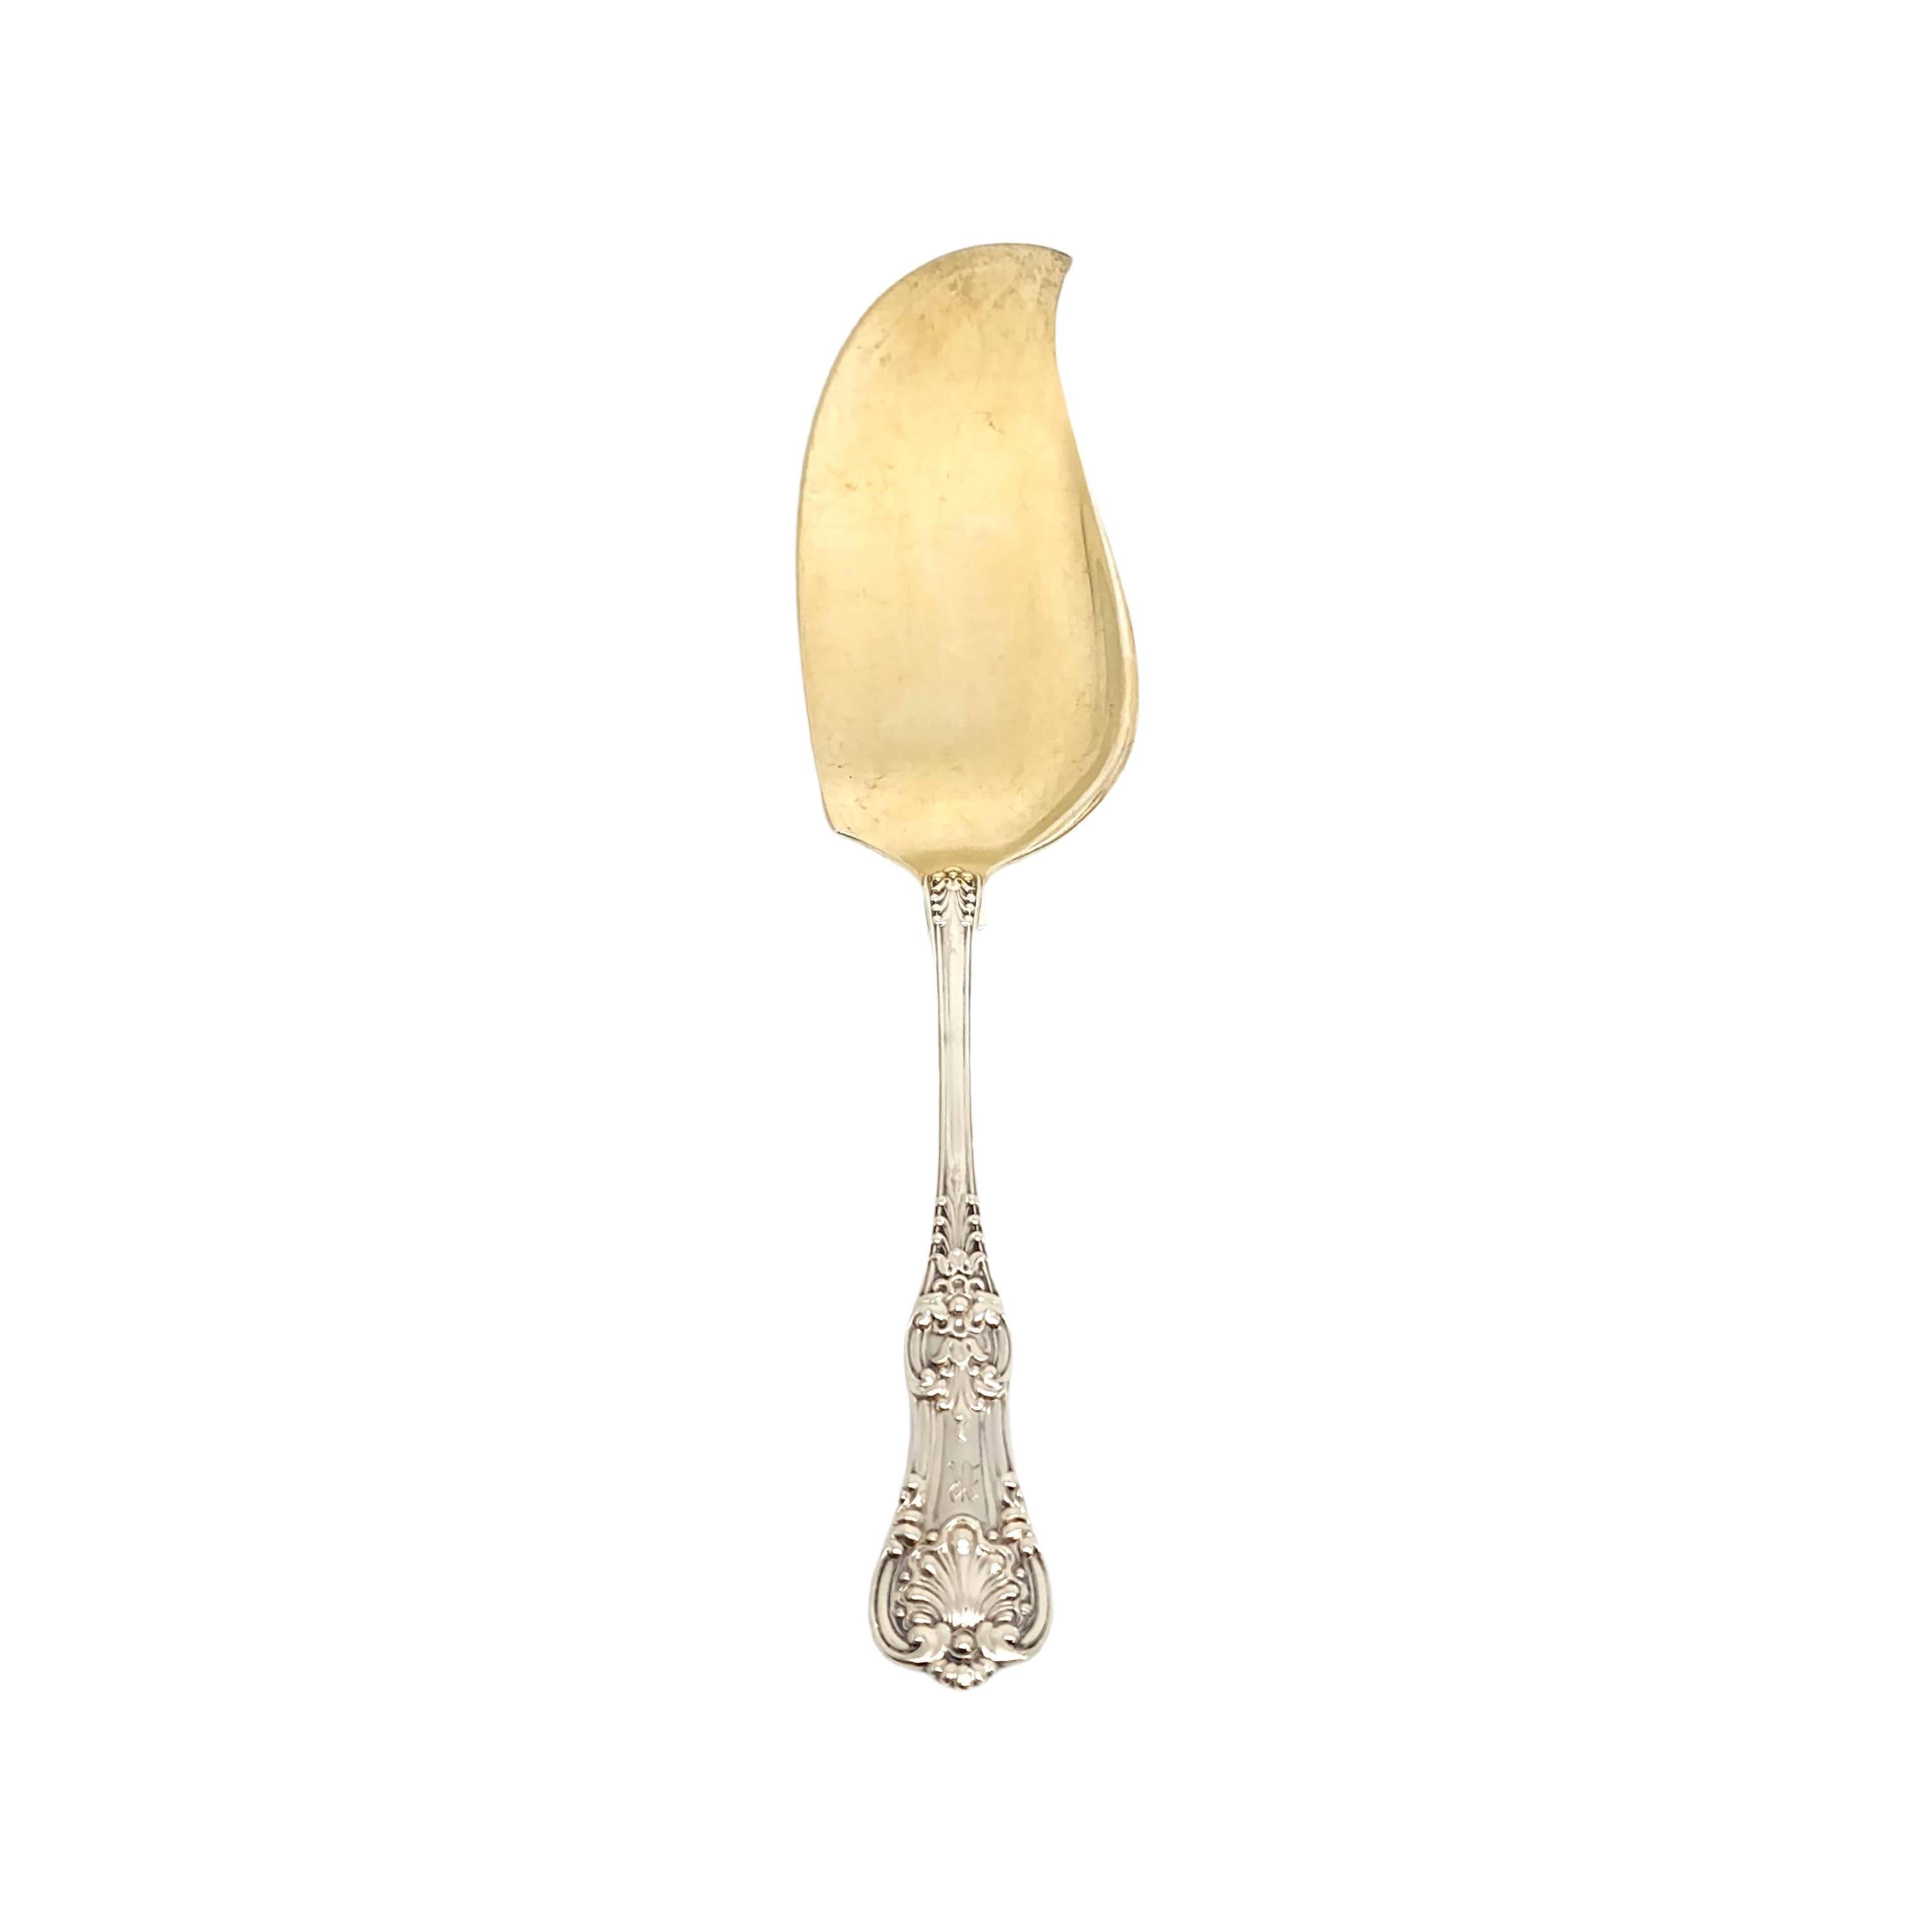 Tiffany & Co English King 1885 Sterling Silver Gold Wash Blade Ice Cream Server For Sale 4